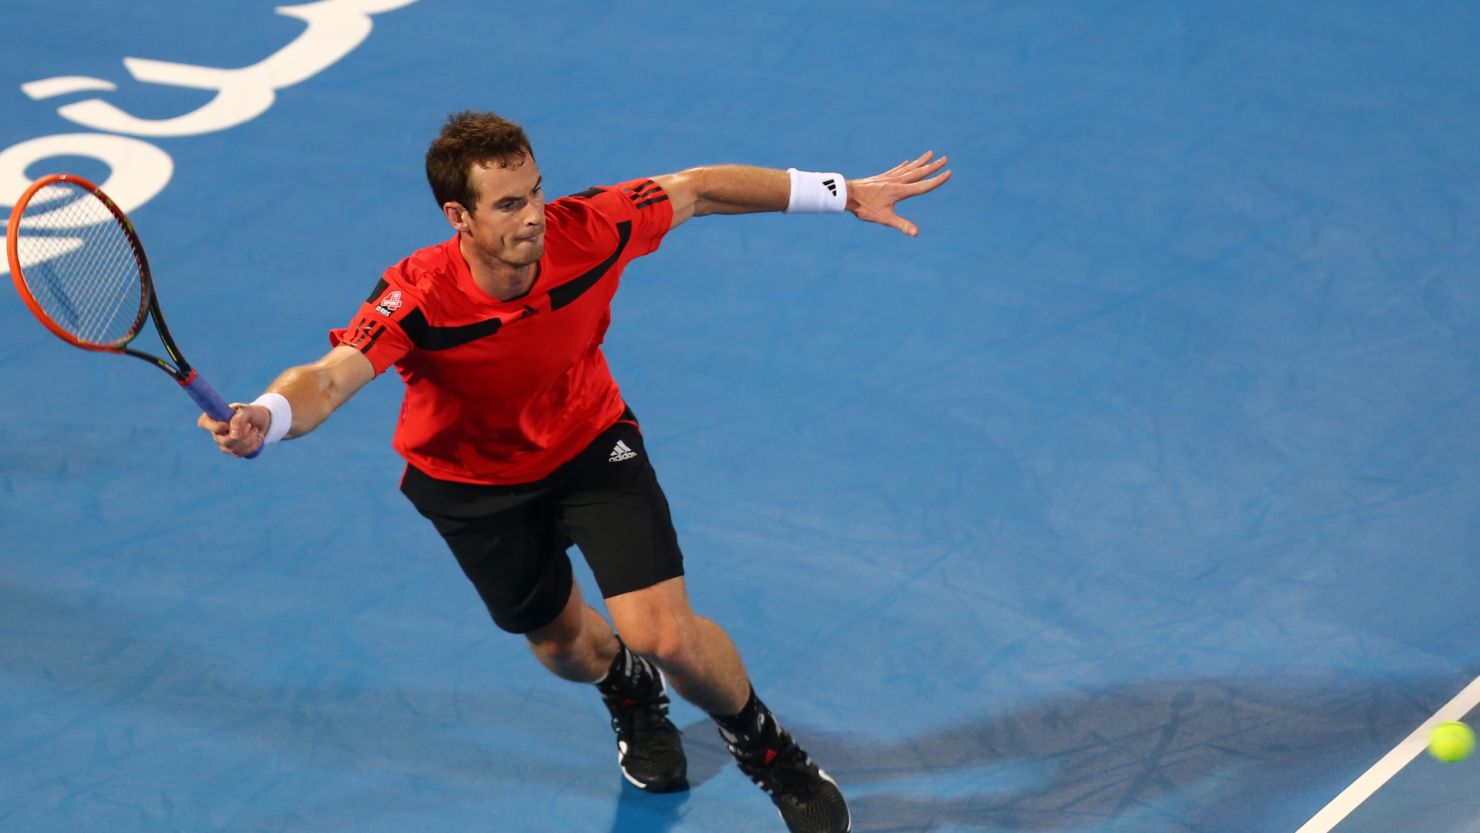 Andy Murray was beaten in straight sets by Jo-Wilfried Tsonga at an exhibition tournament in Abu Dhabi on Thursday. 